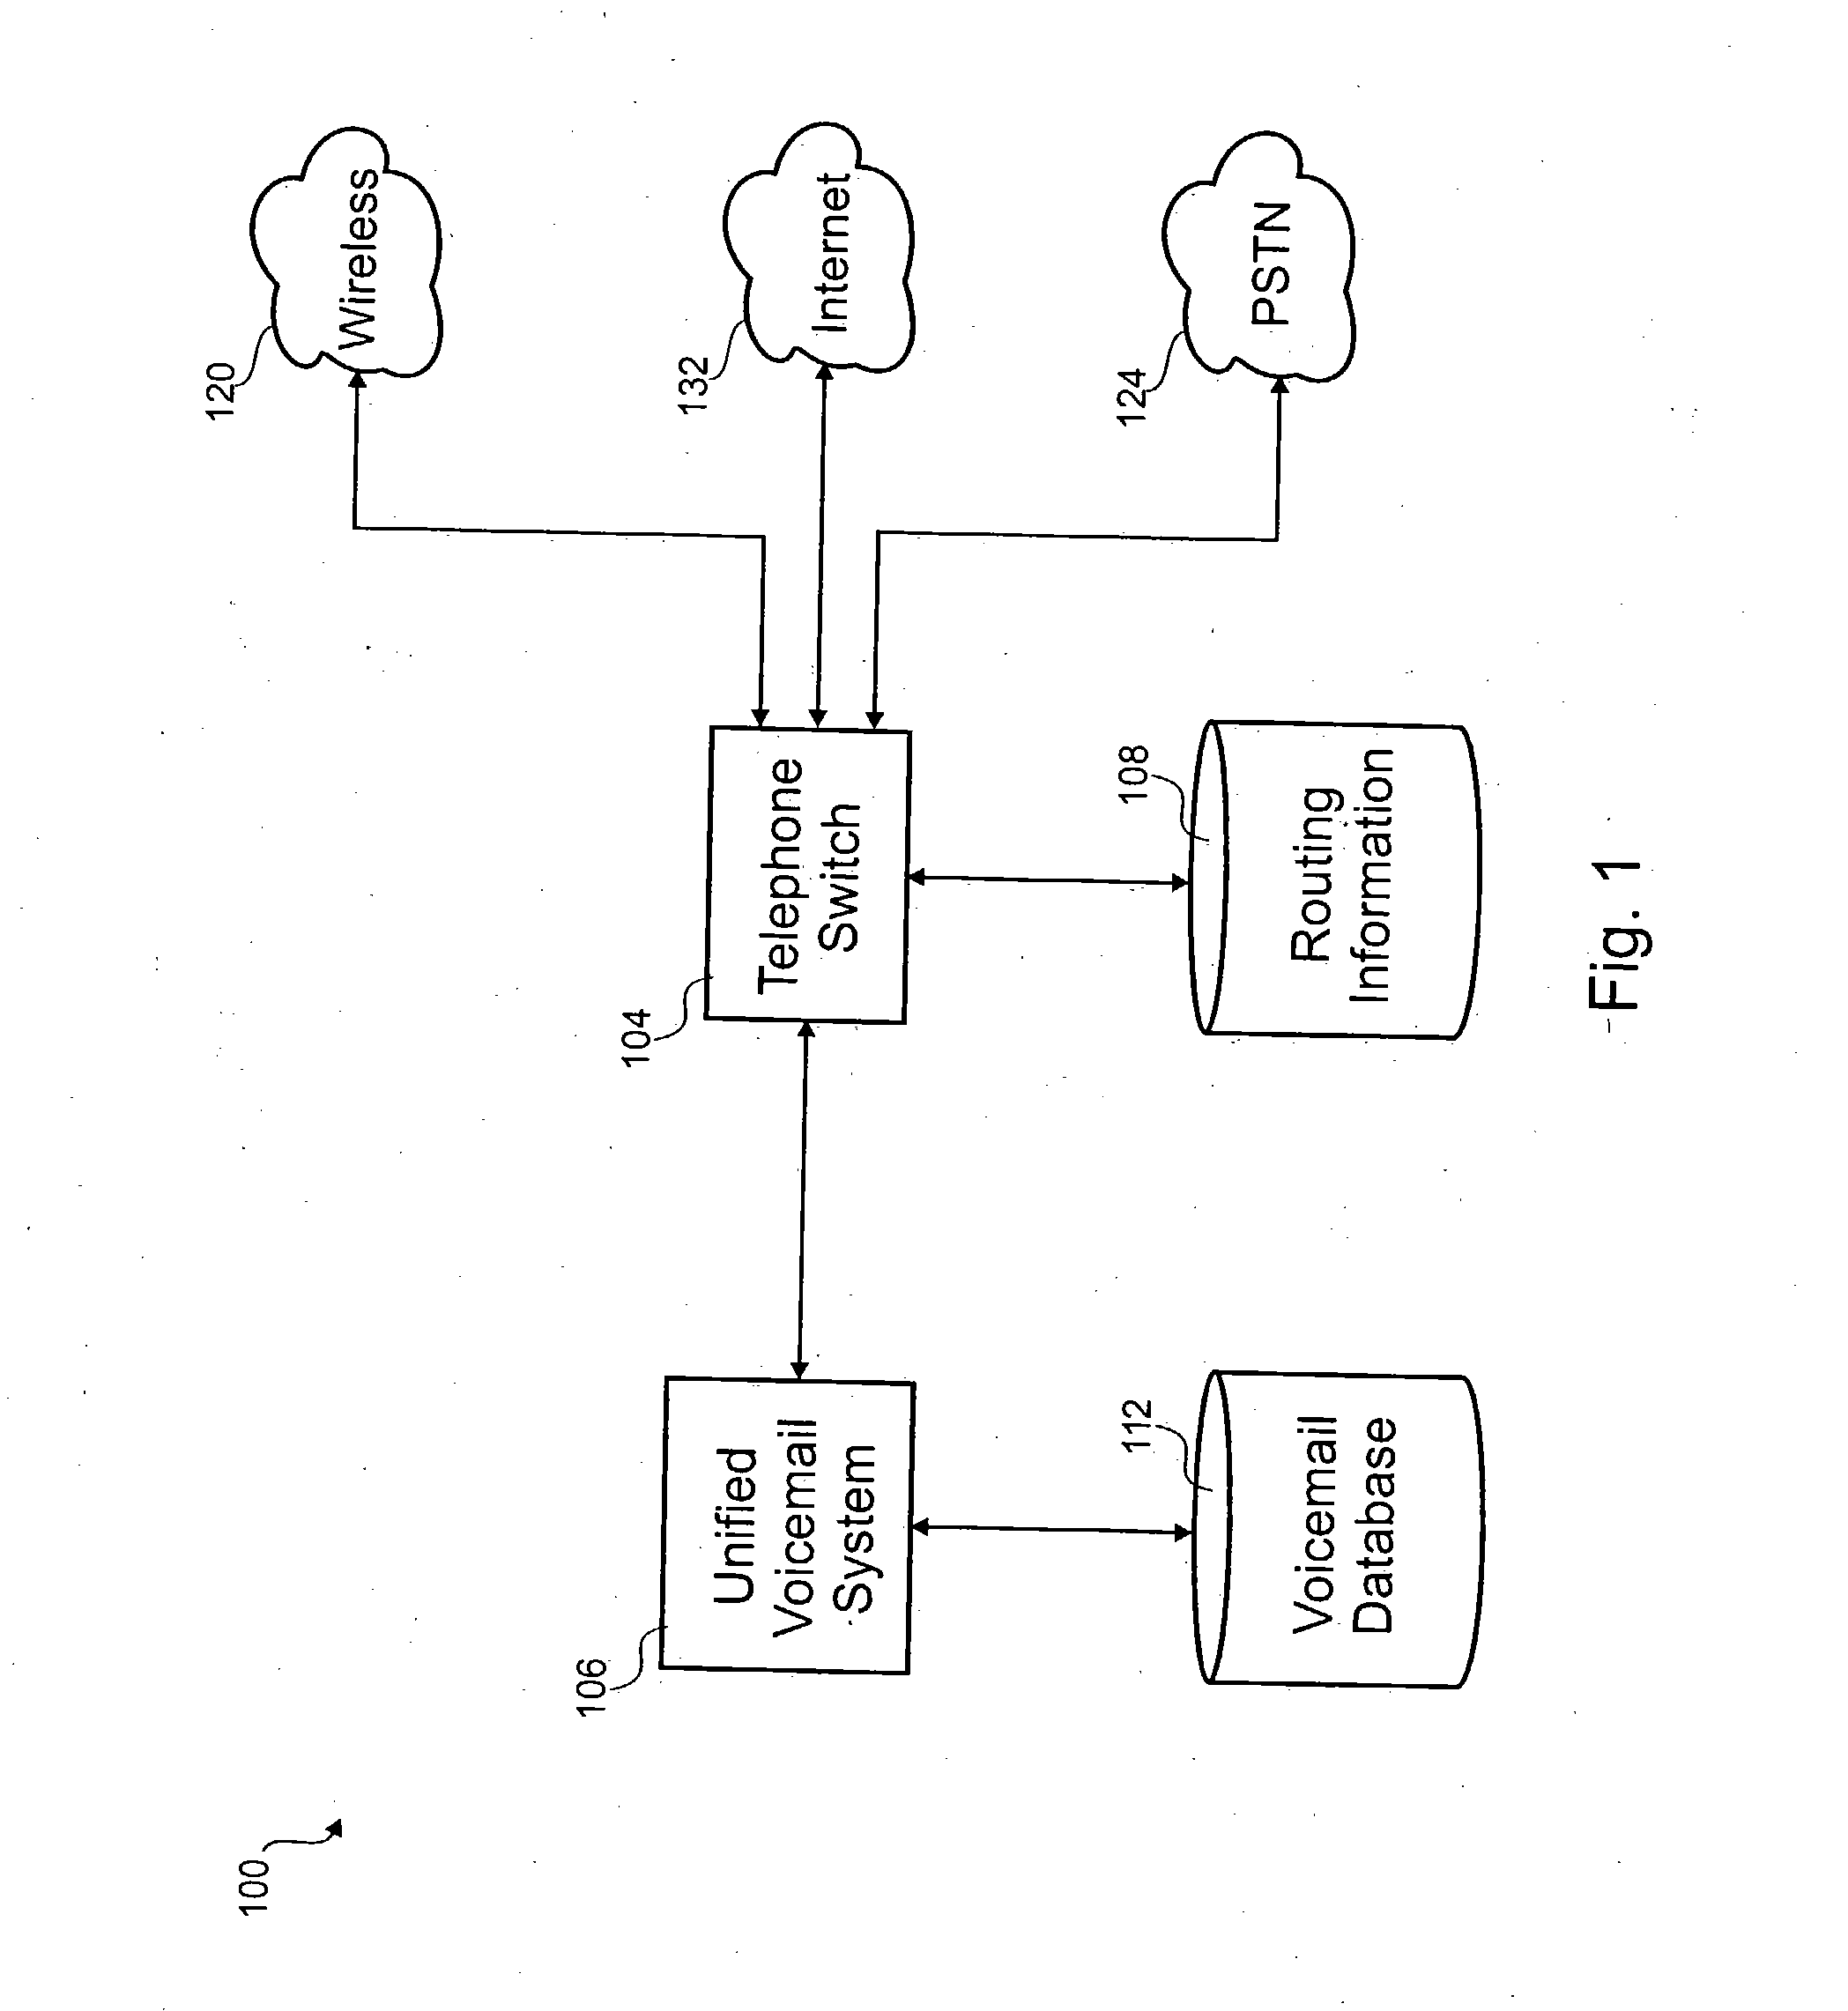 Personal communication service network interface device